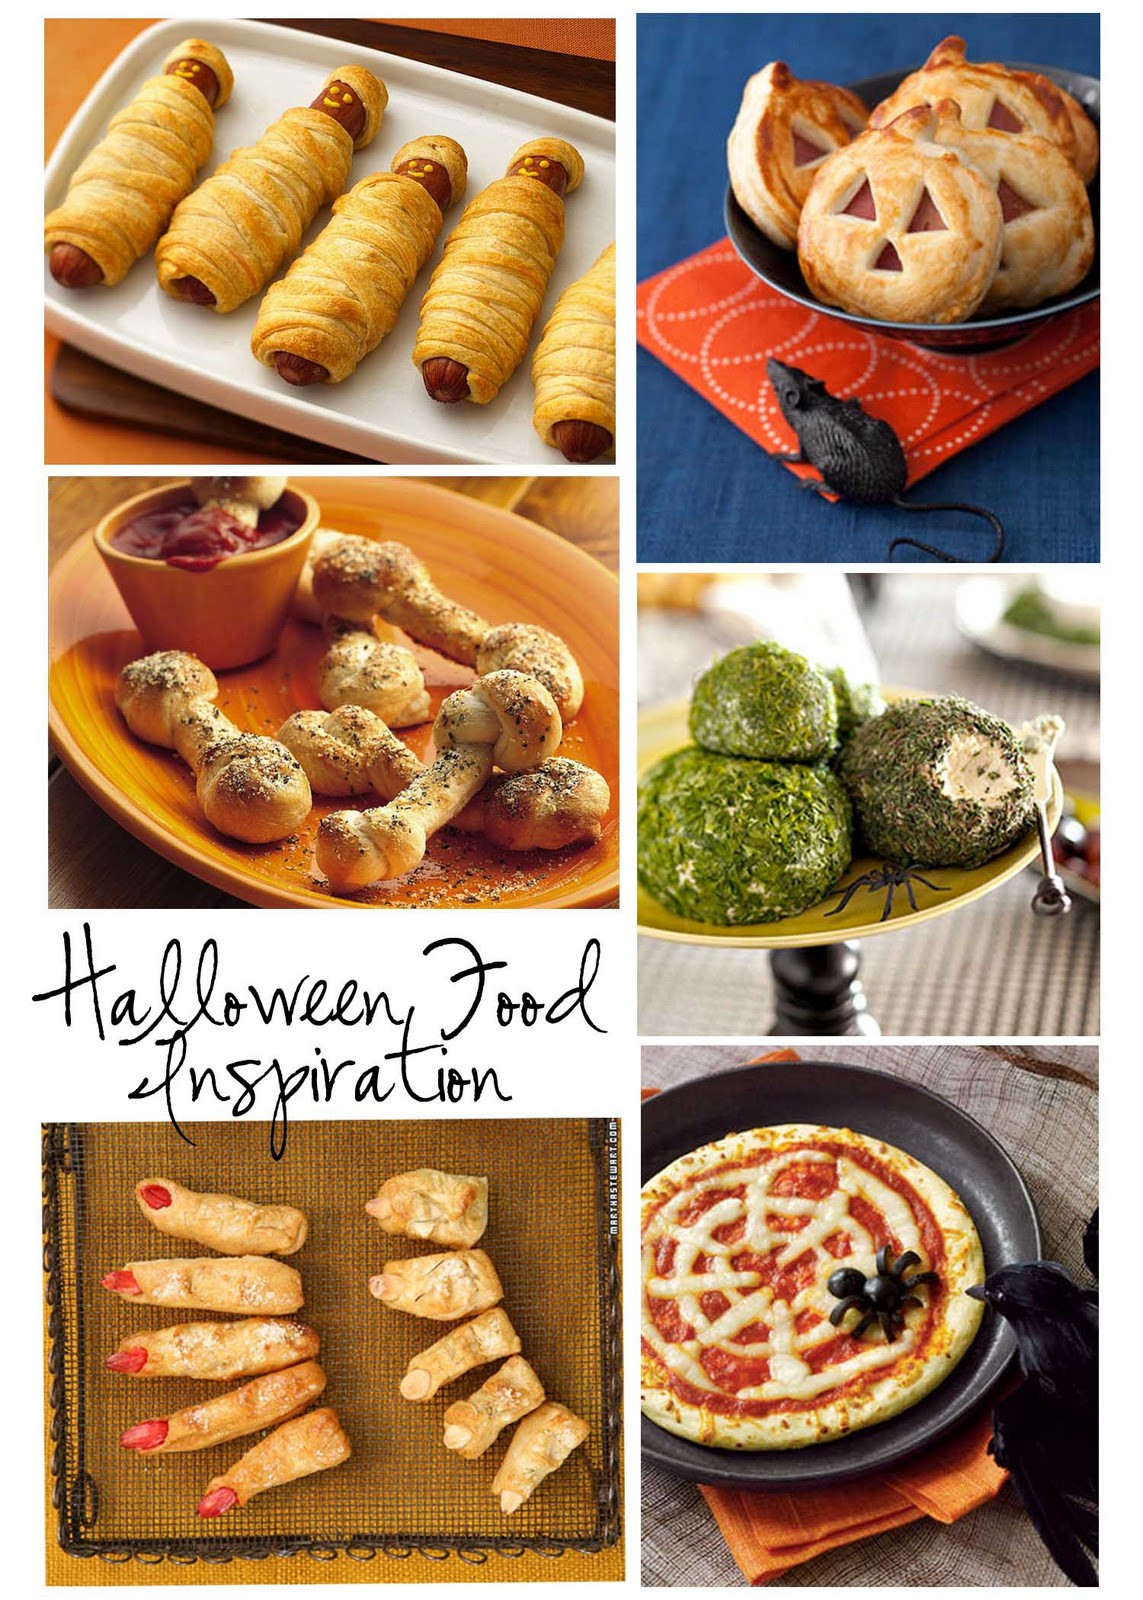 Halloween Food Ideas For A Party
 Room to Inspire Spooky Food Ideas